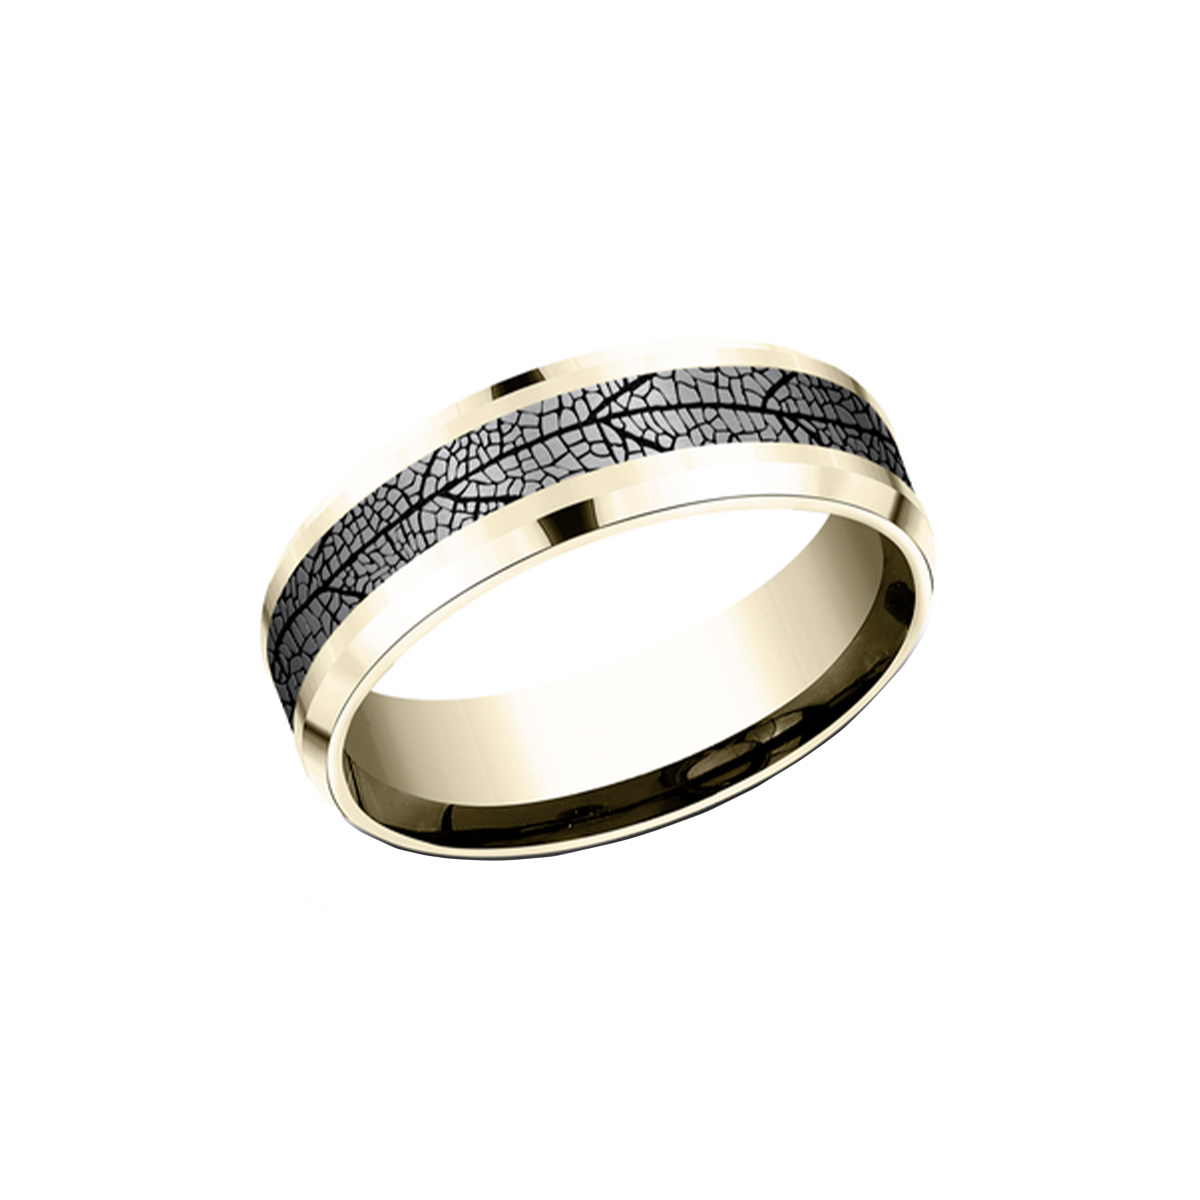 Tantalum and 14K Yellow Gold Leaf Patterned Wedding Band